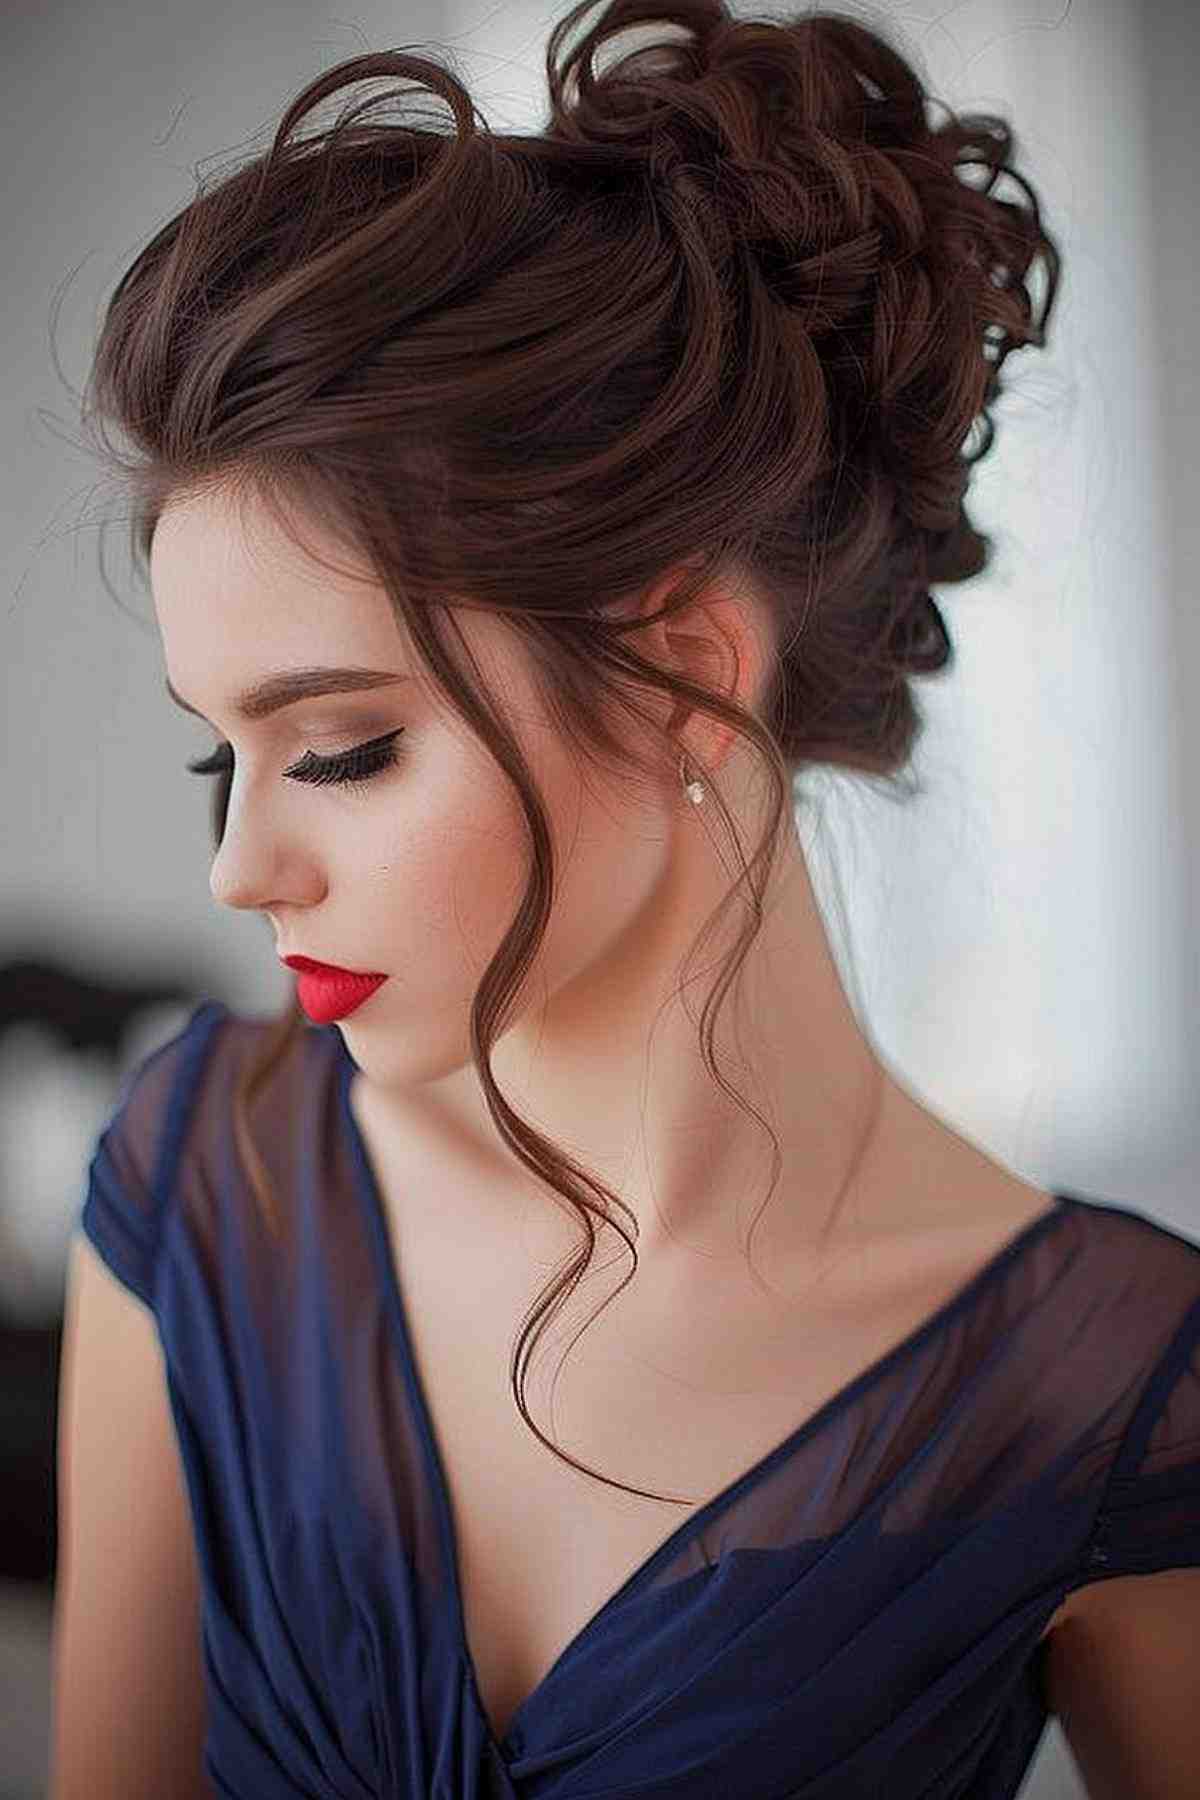 Romantic updo with loose tendrils for a sophisticated gala night hairstyle.